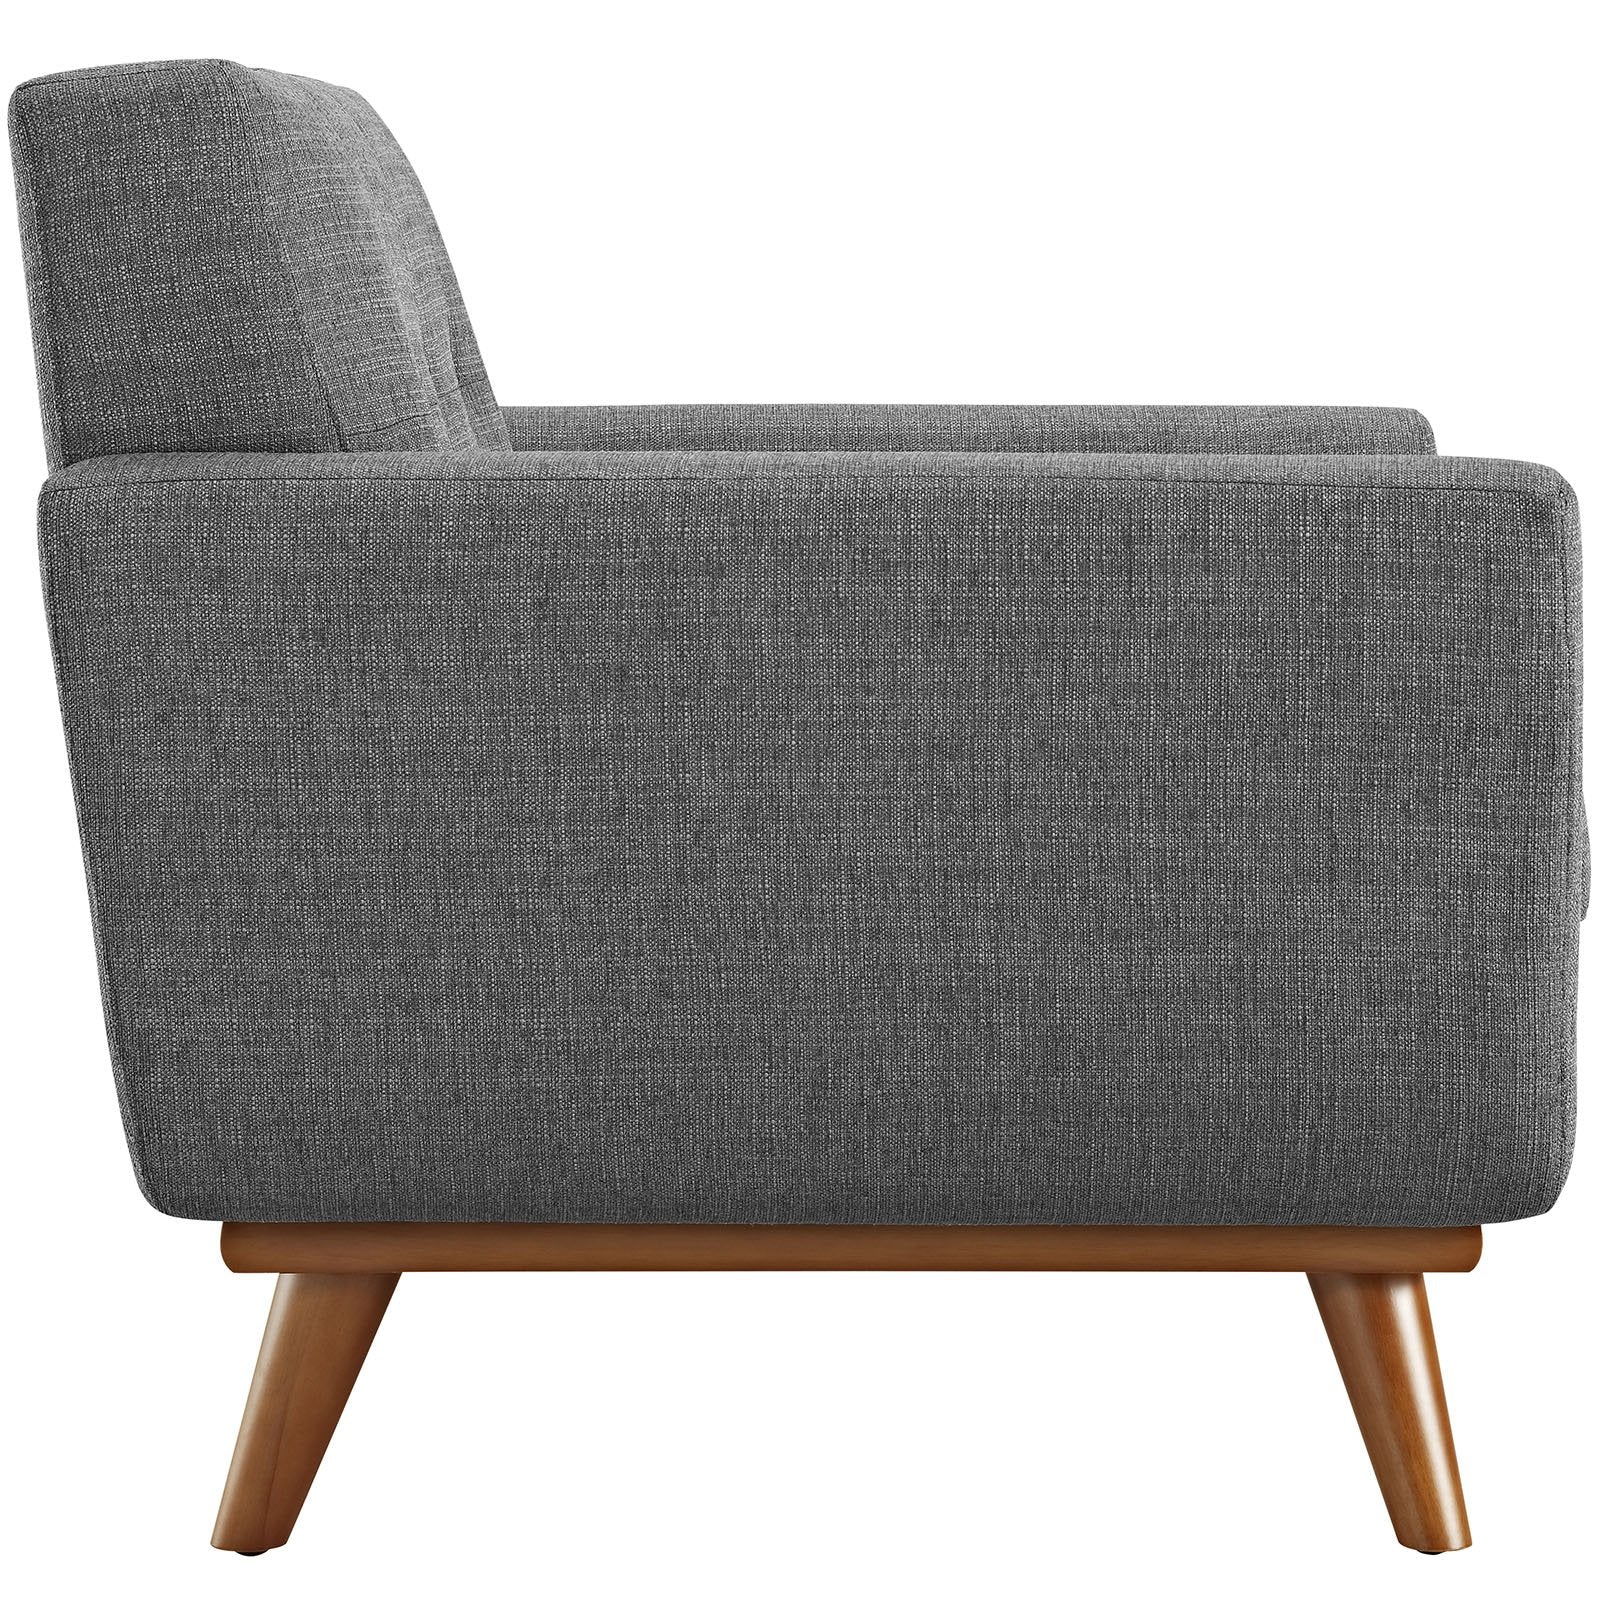 Chair | Engage Plush Armchair | Tufted Buttons | Lounging, Relaxing, Conversations | Cherry Wood Legs | Gray Fabric | casafoyer.myshopify.com